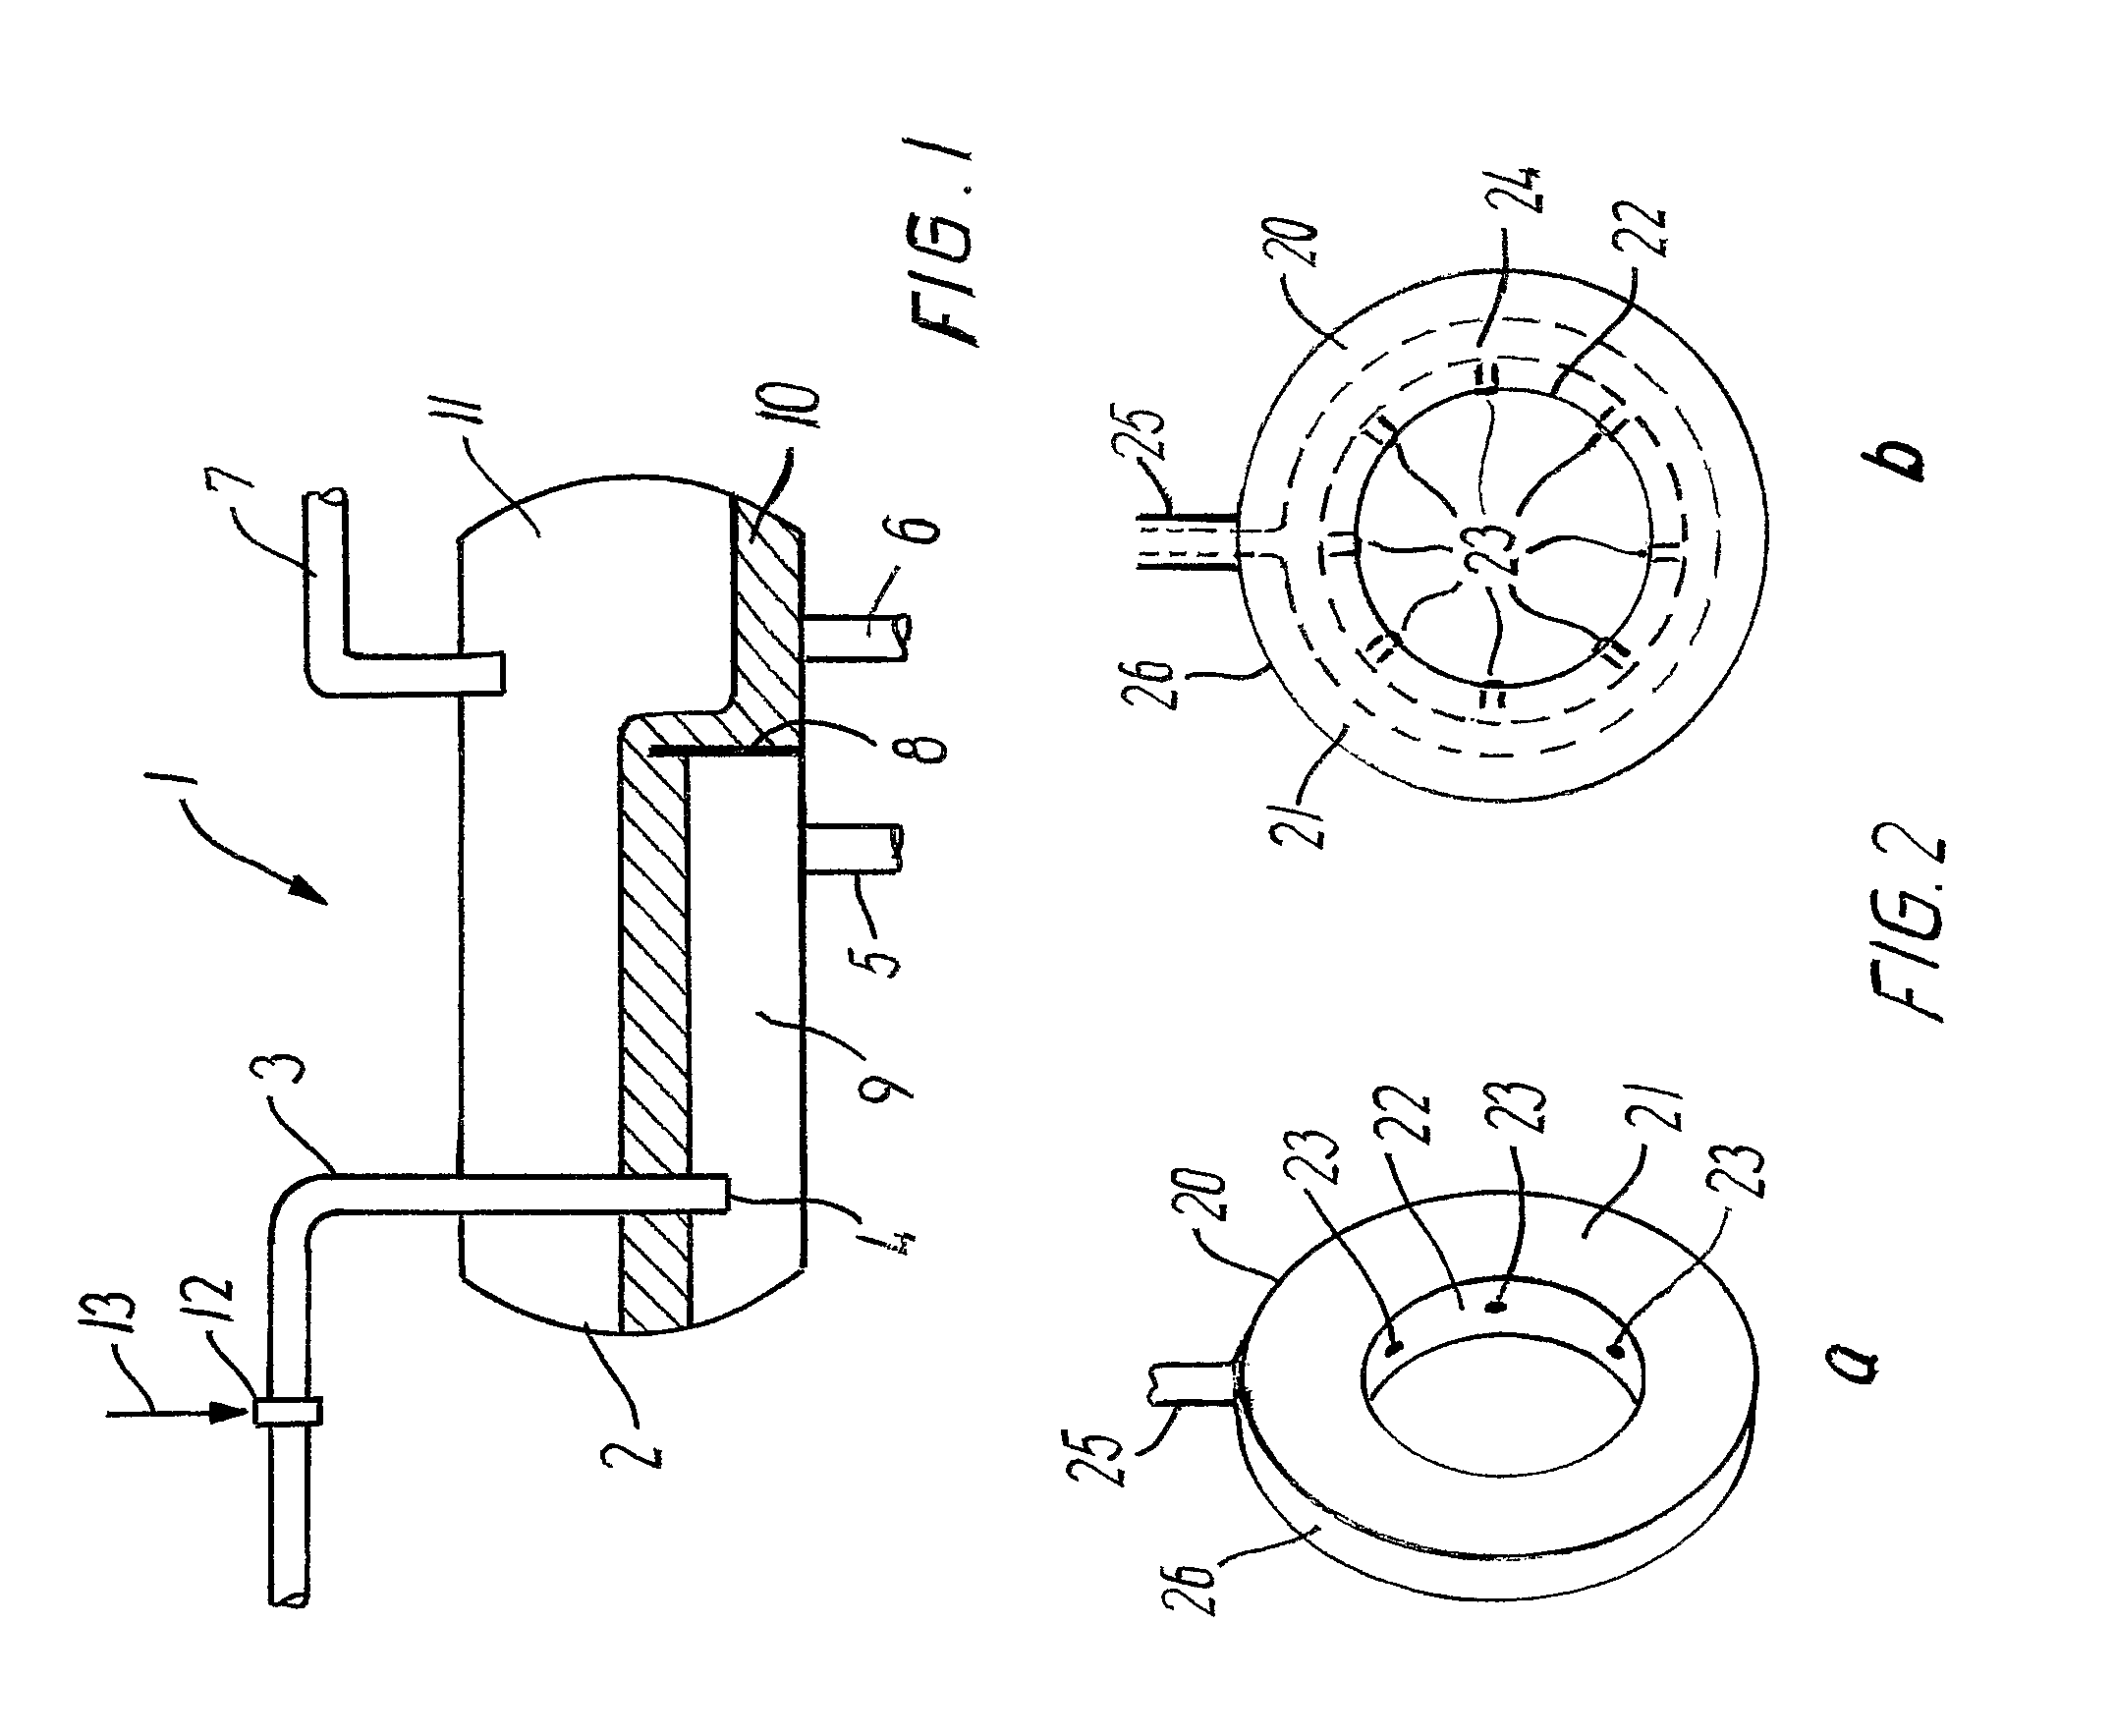 Gravity separator, and a method for separating a mixture containing water, oil, and gas